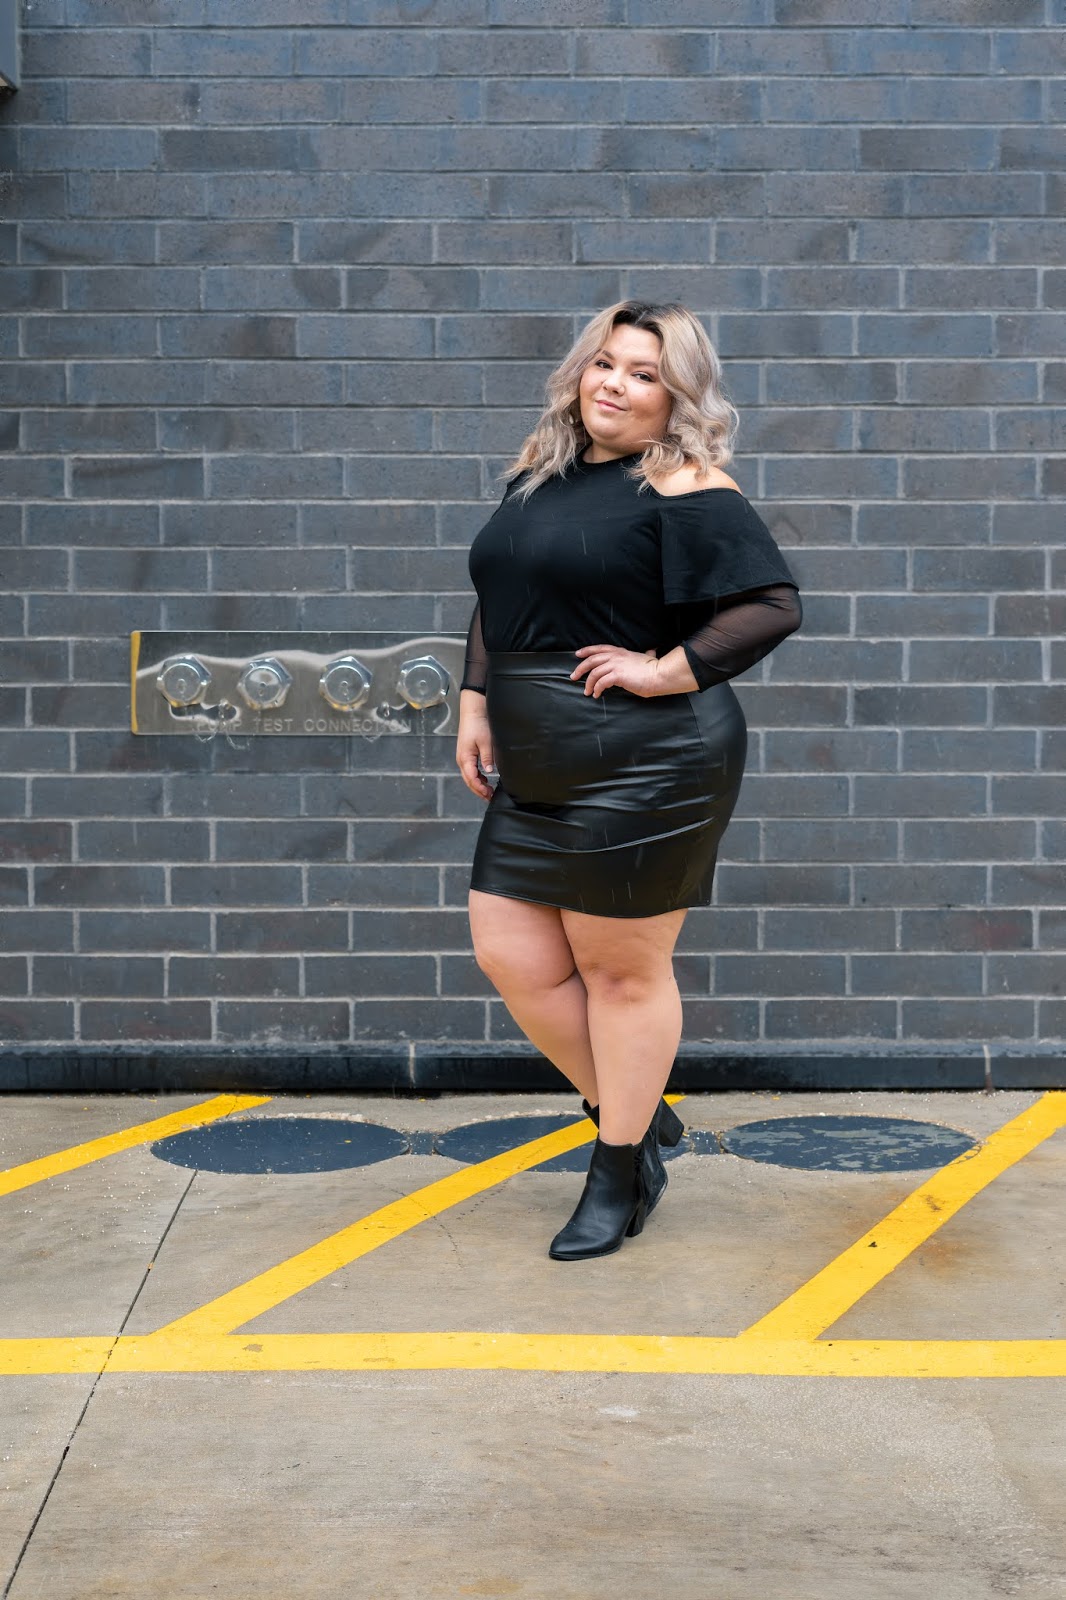 Chicago Plus Size Petite Fashion Blogger, youtuber, and model Natalie Craig, of Natalie in the City, reviews Pink Clove's Daisy Black Halterneck Cold Shoulder Frill Top and Daphne Black PVC Mini Skirt.